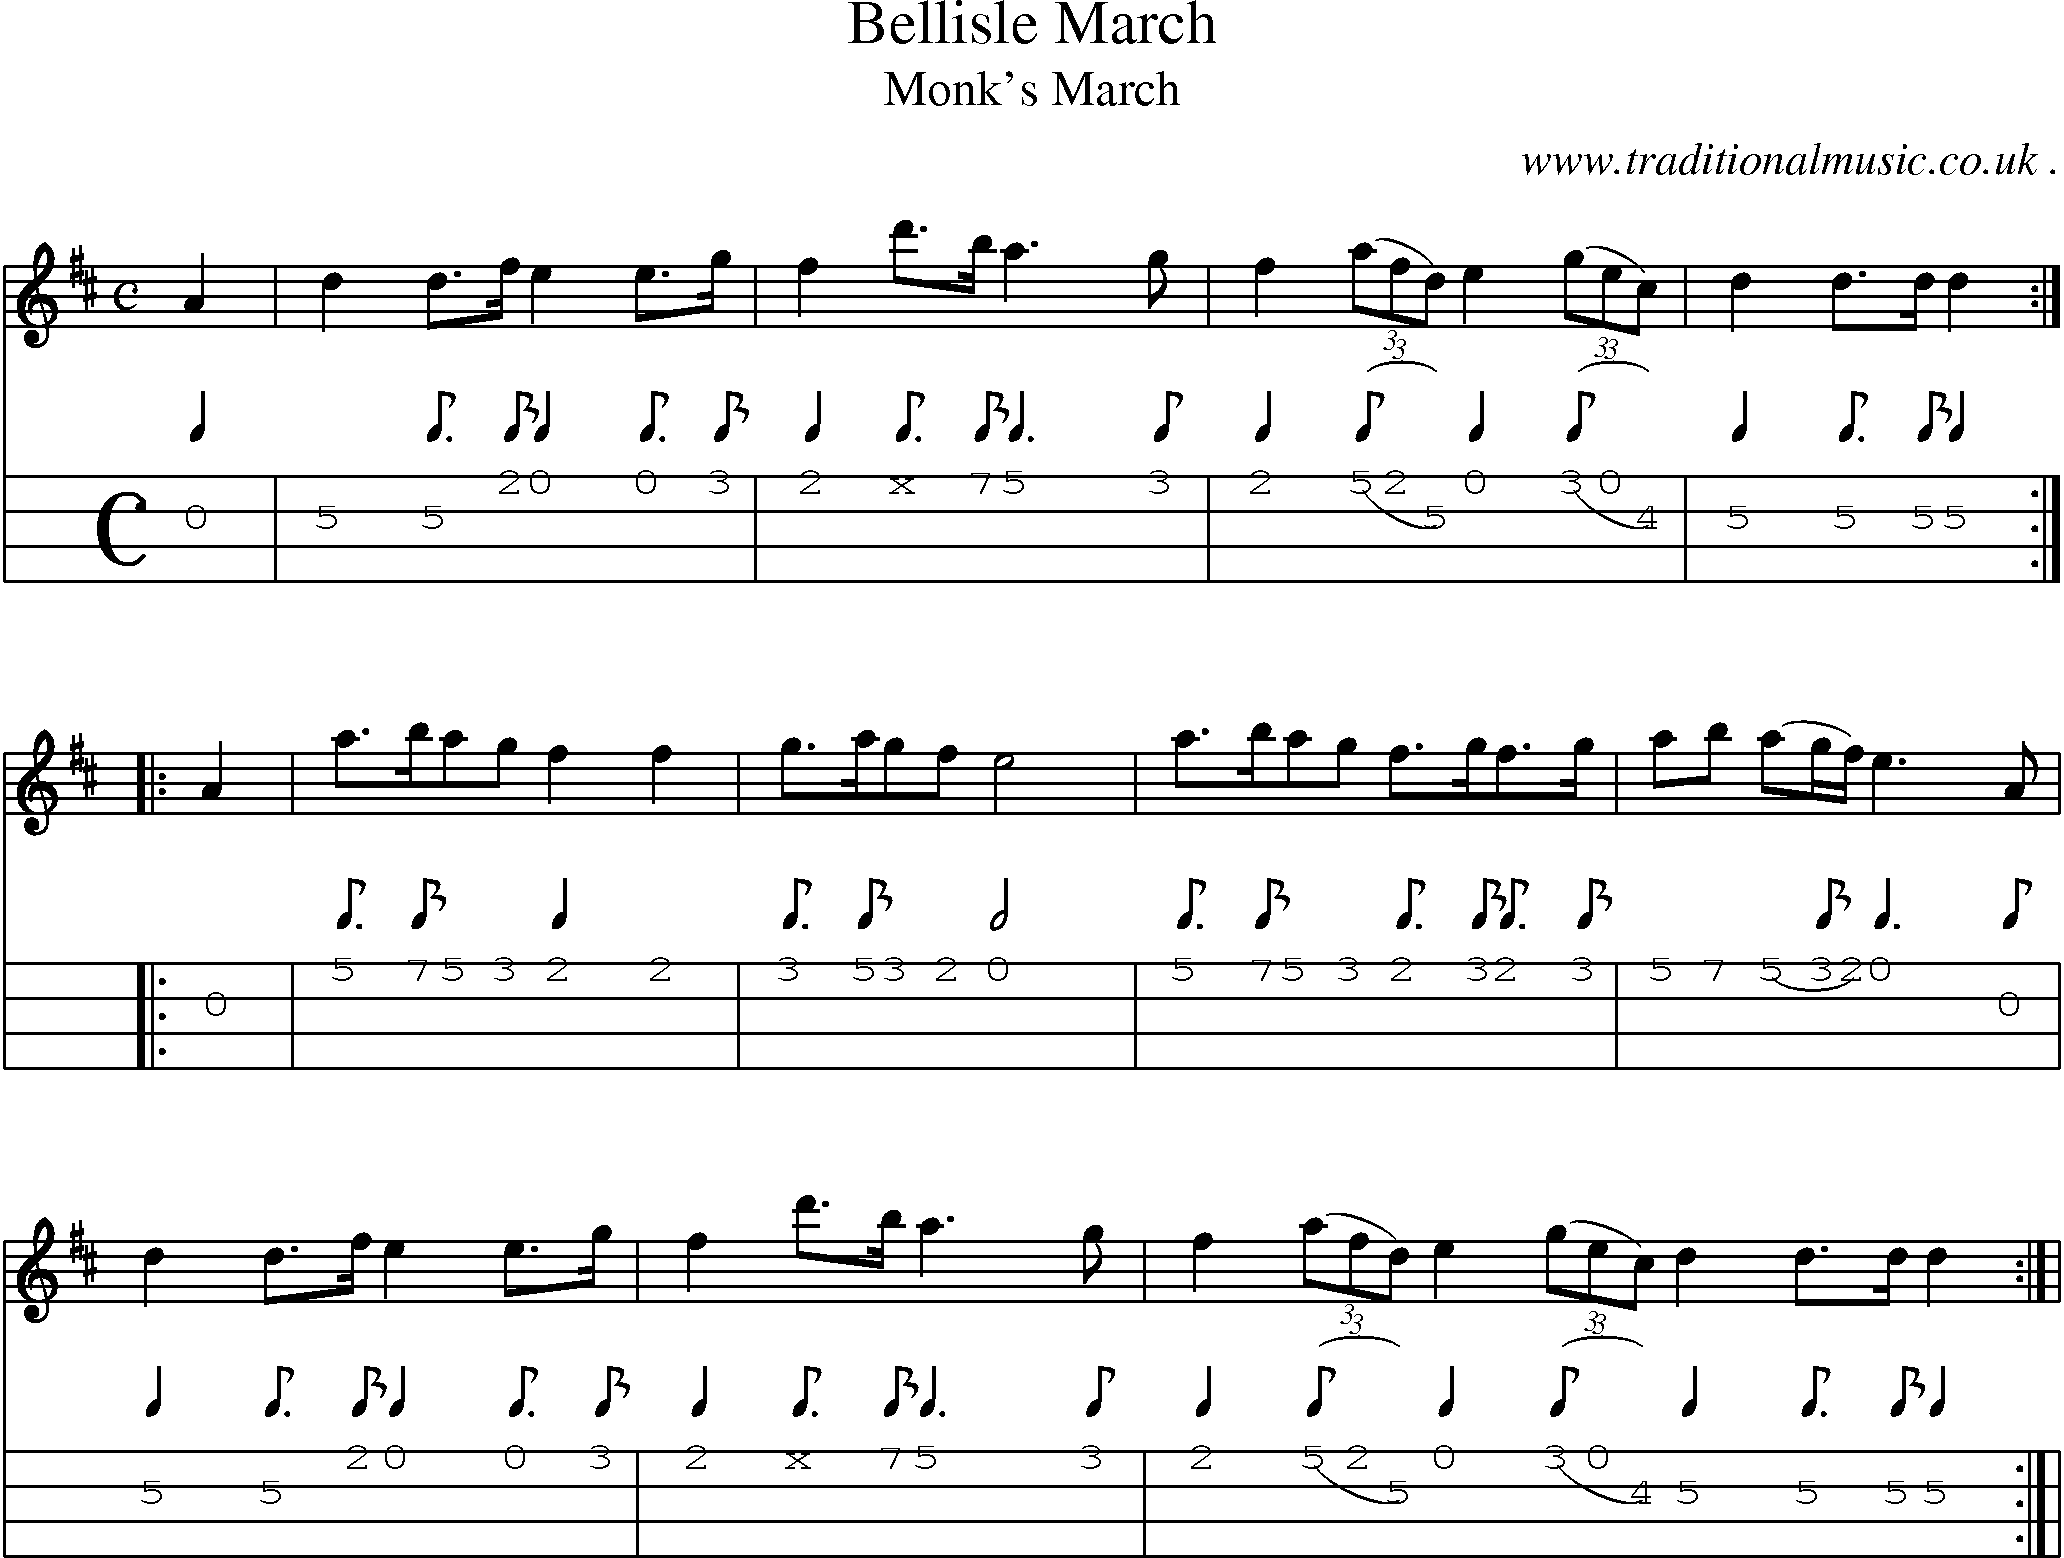 Sheet-Music and Mandolin Tabs for Bellisle March